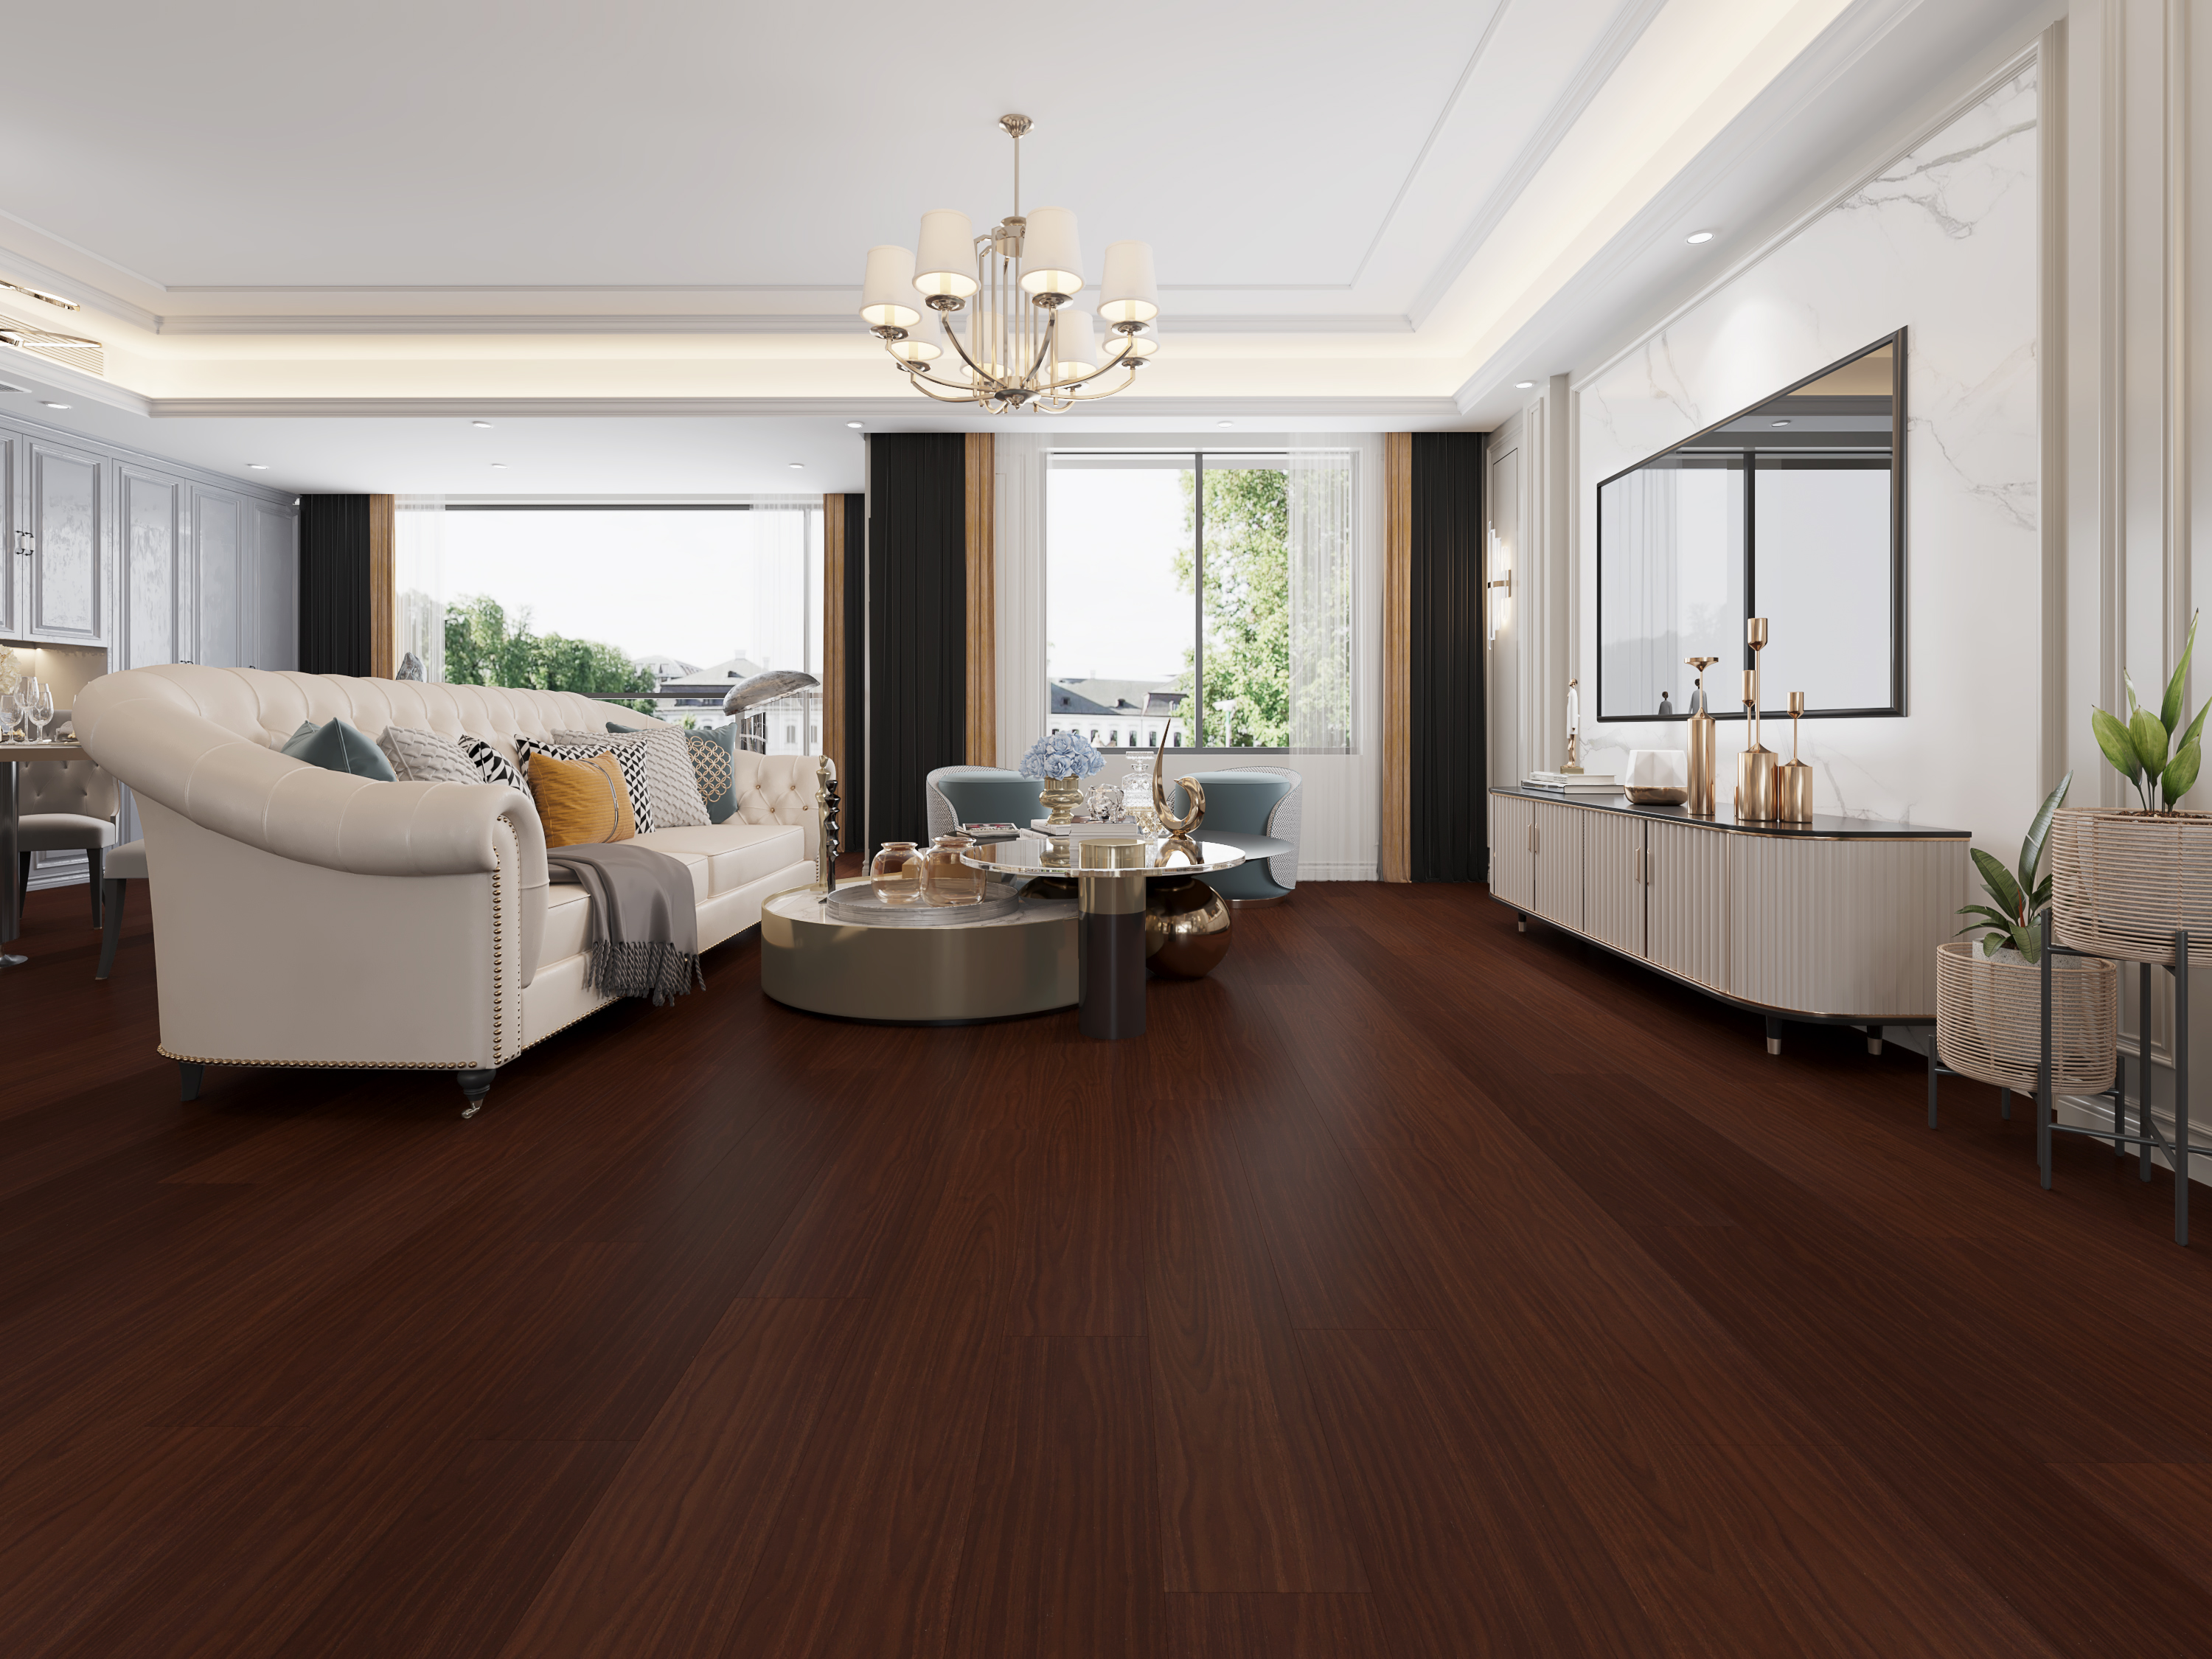 How much is the price of spc flooring per square meter and how to choose high quality spc flooring